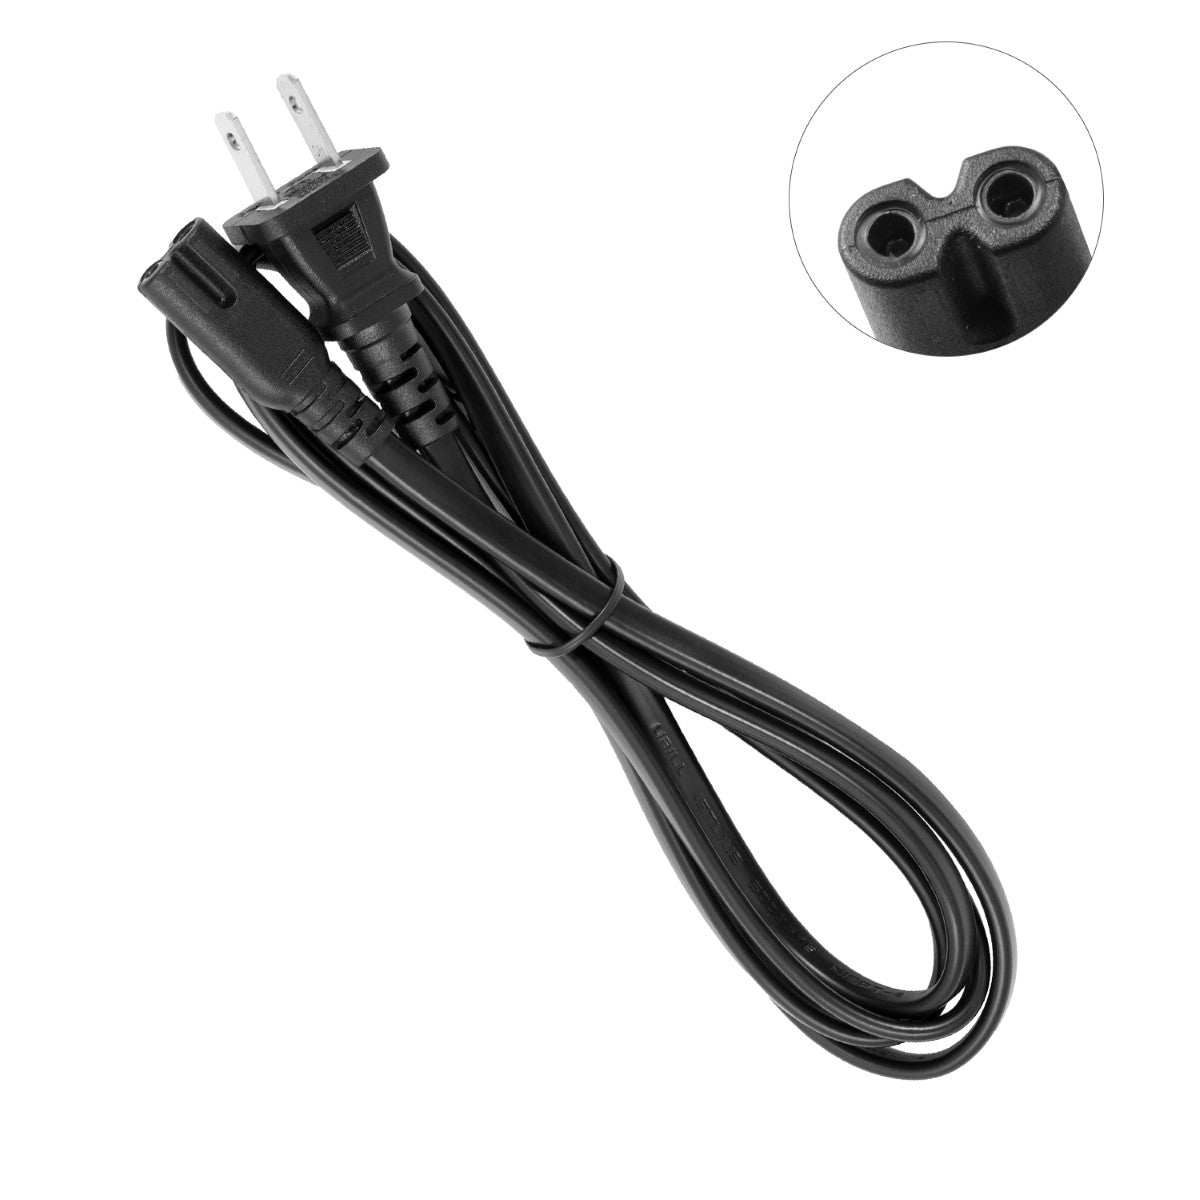 Power Cord for Canon MAXIFY MB2720 Wireless Printer.